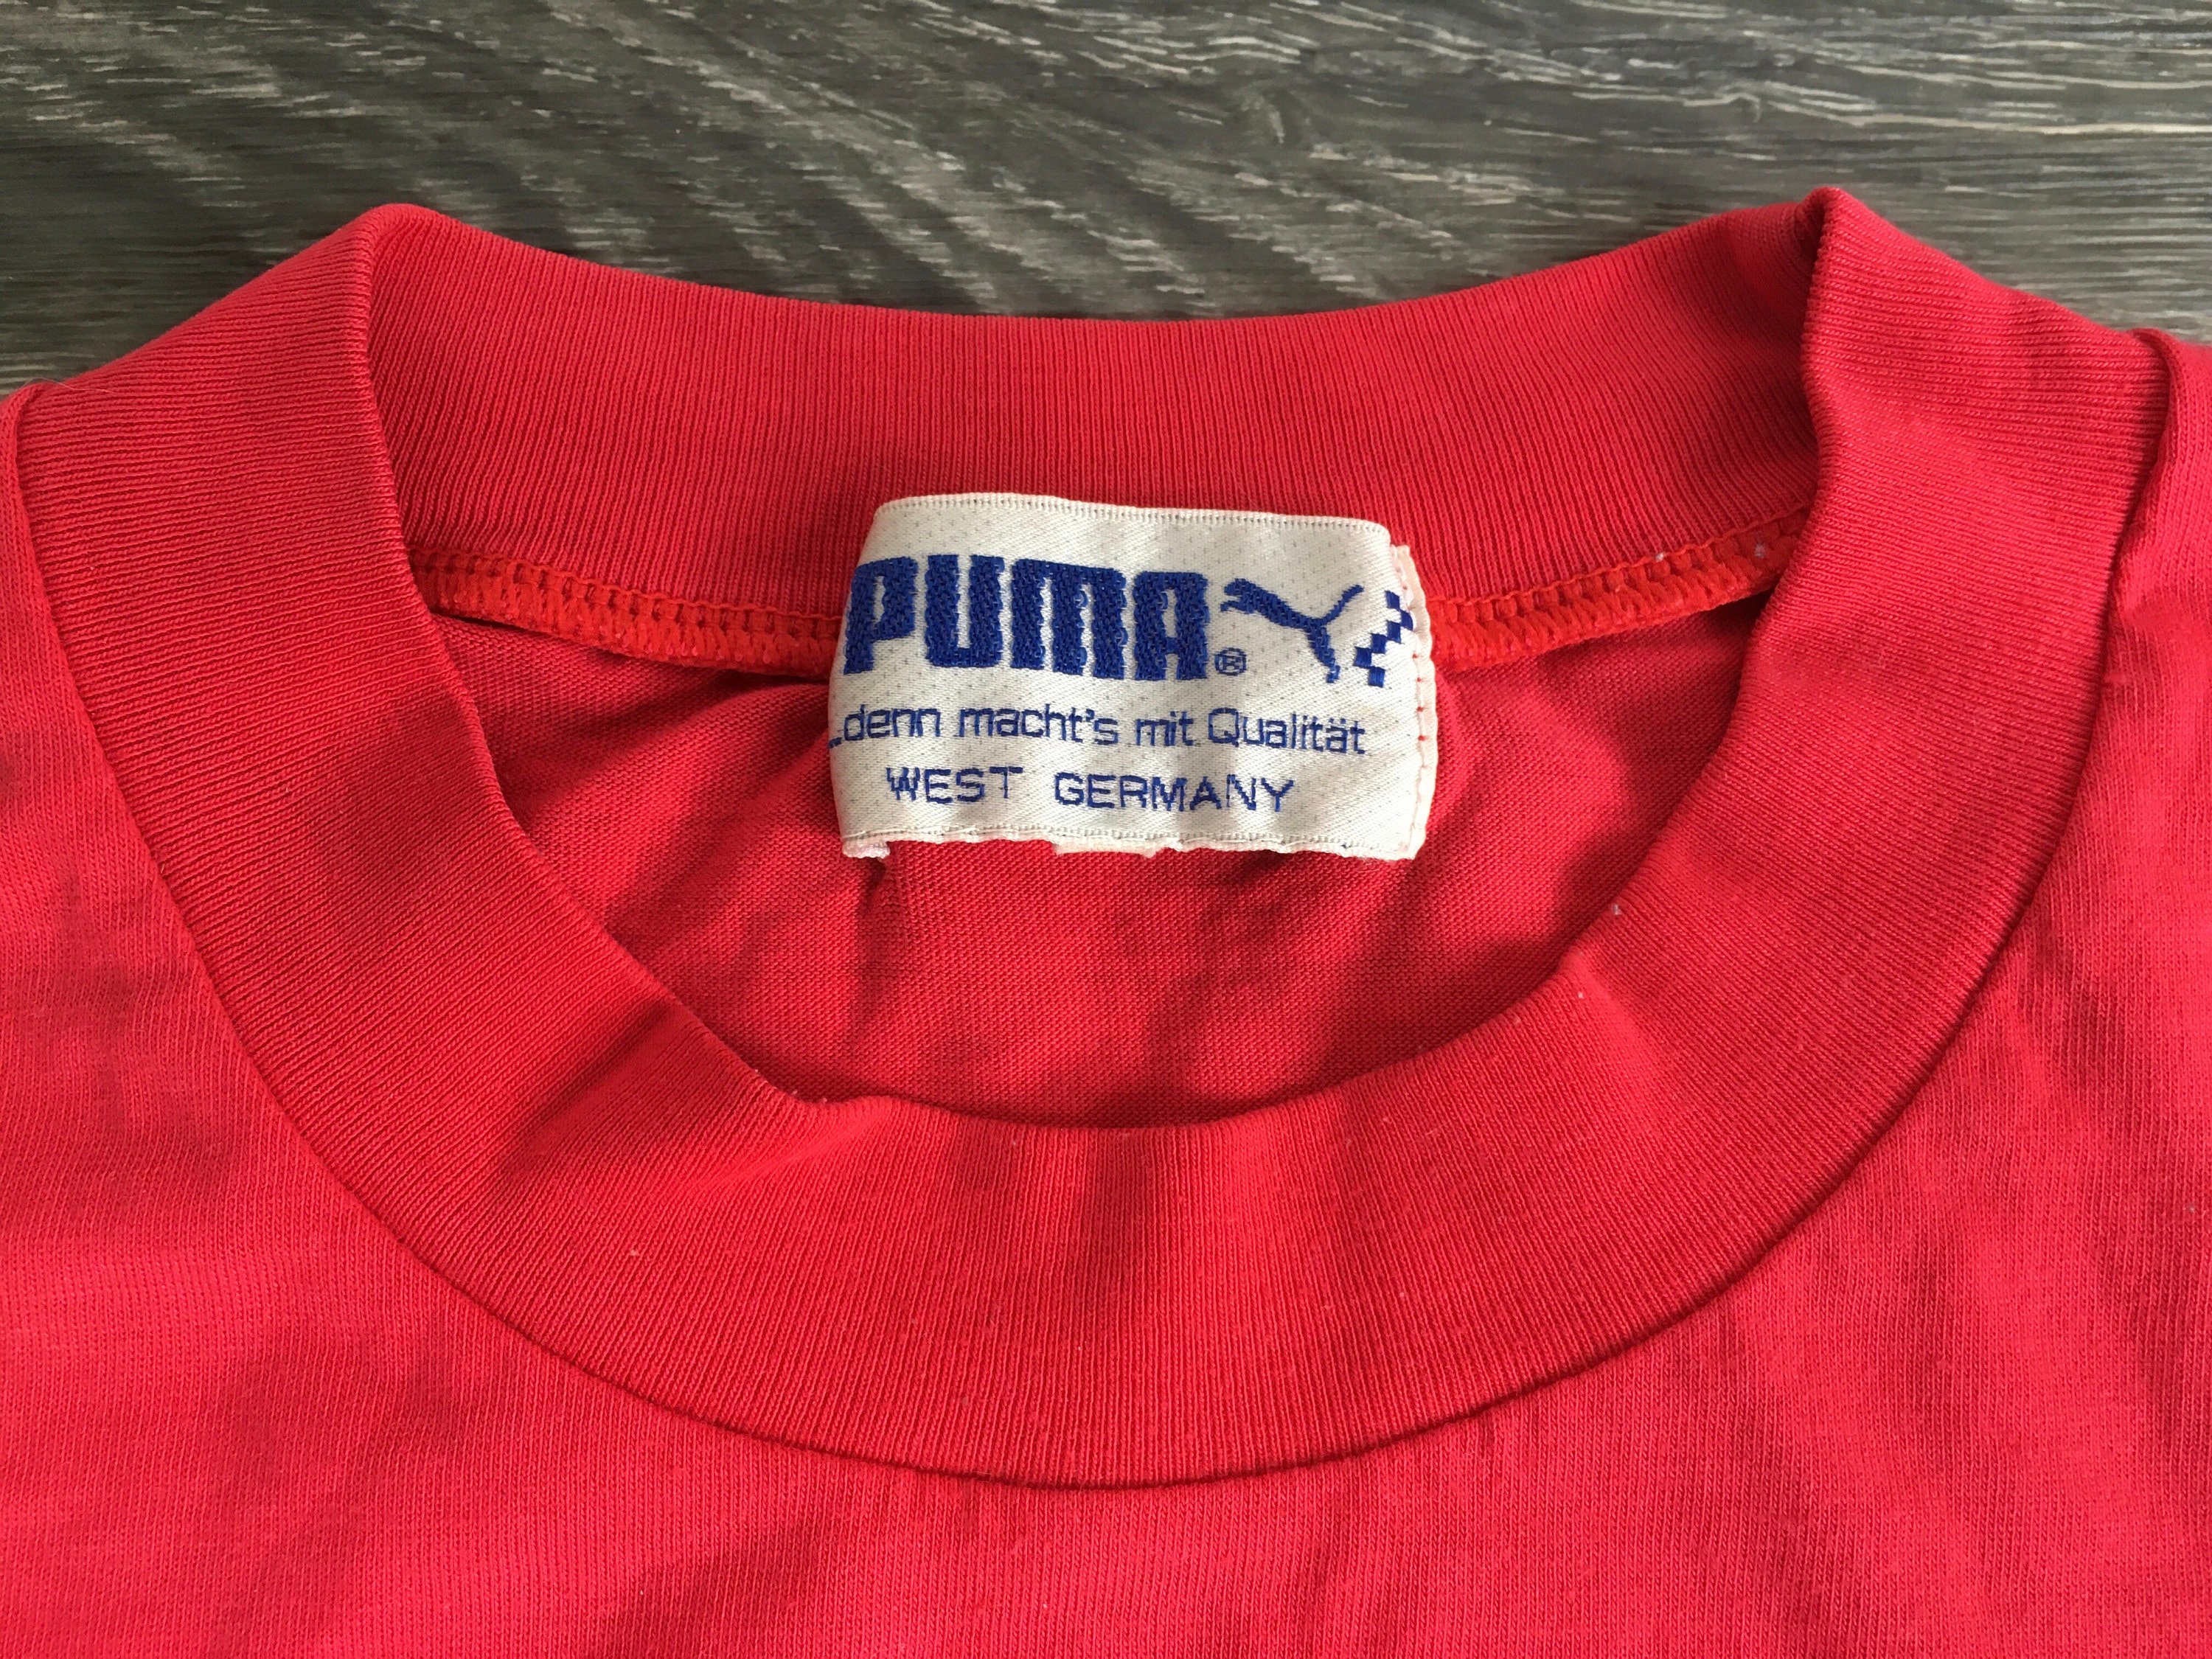 PUMA Tennis Shirt 80s Vintage Super Soft Red Made in West | Etsy